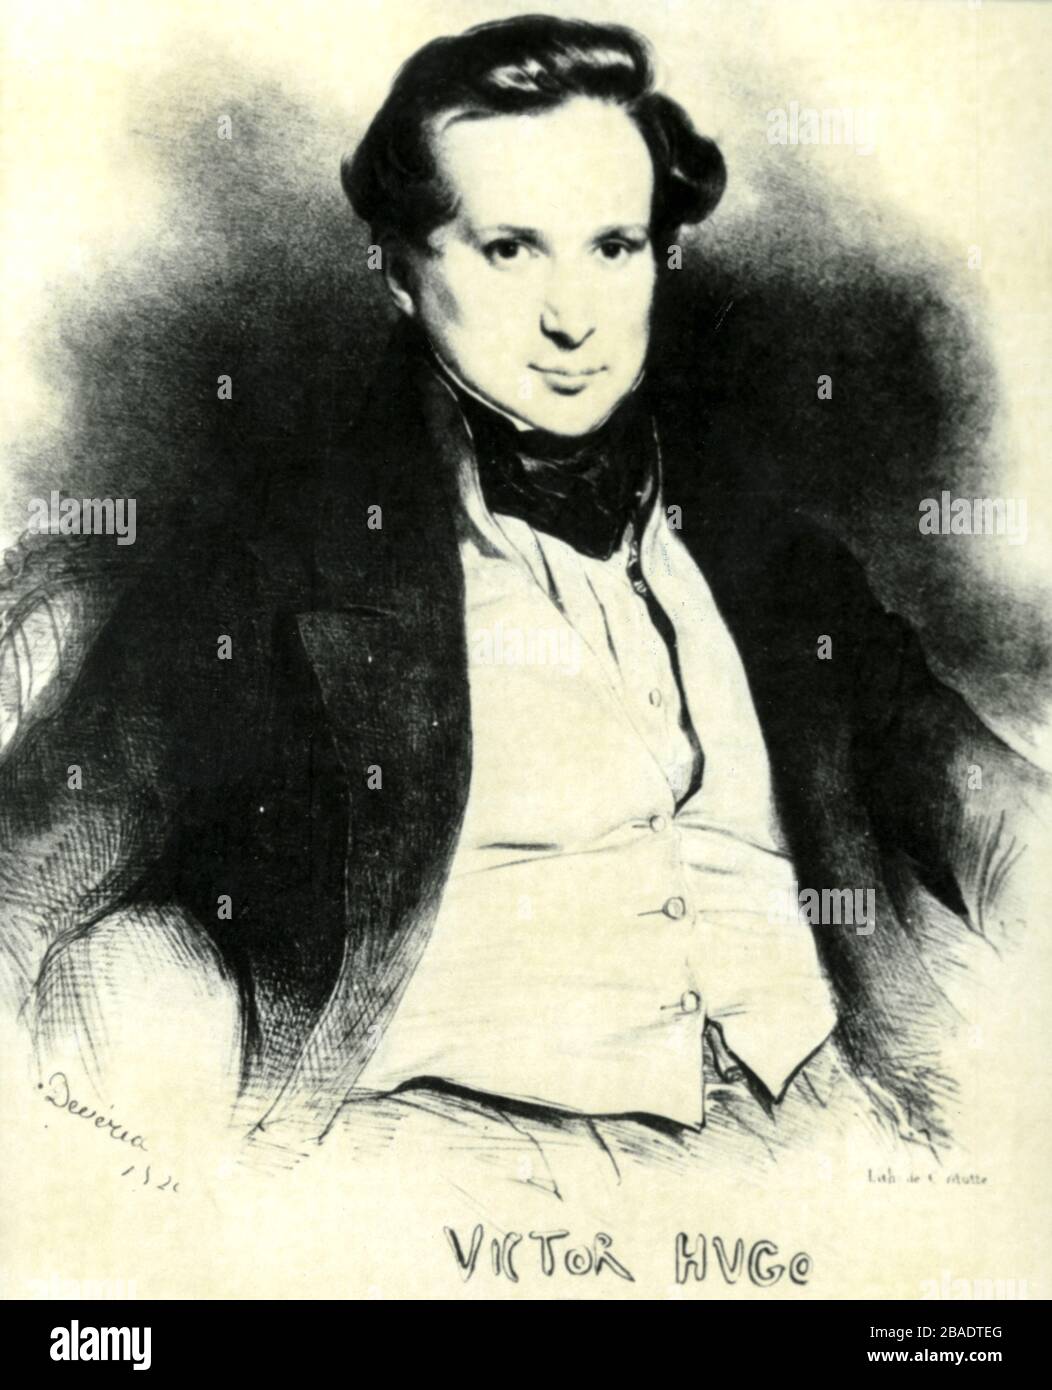 victor hugo, etching by charles etienne pierre motte, made by eugene deveria, 1829 Stock Photo